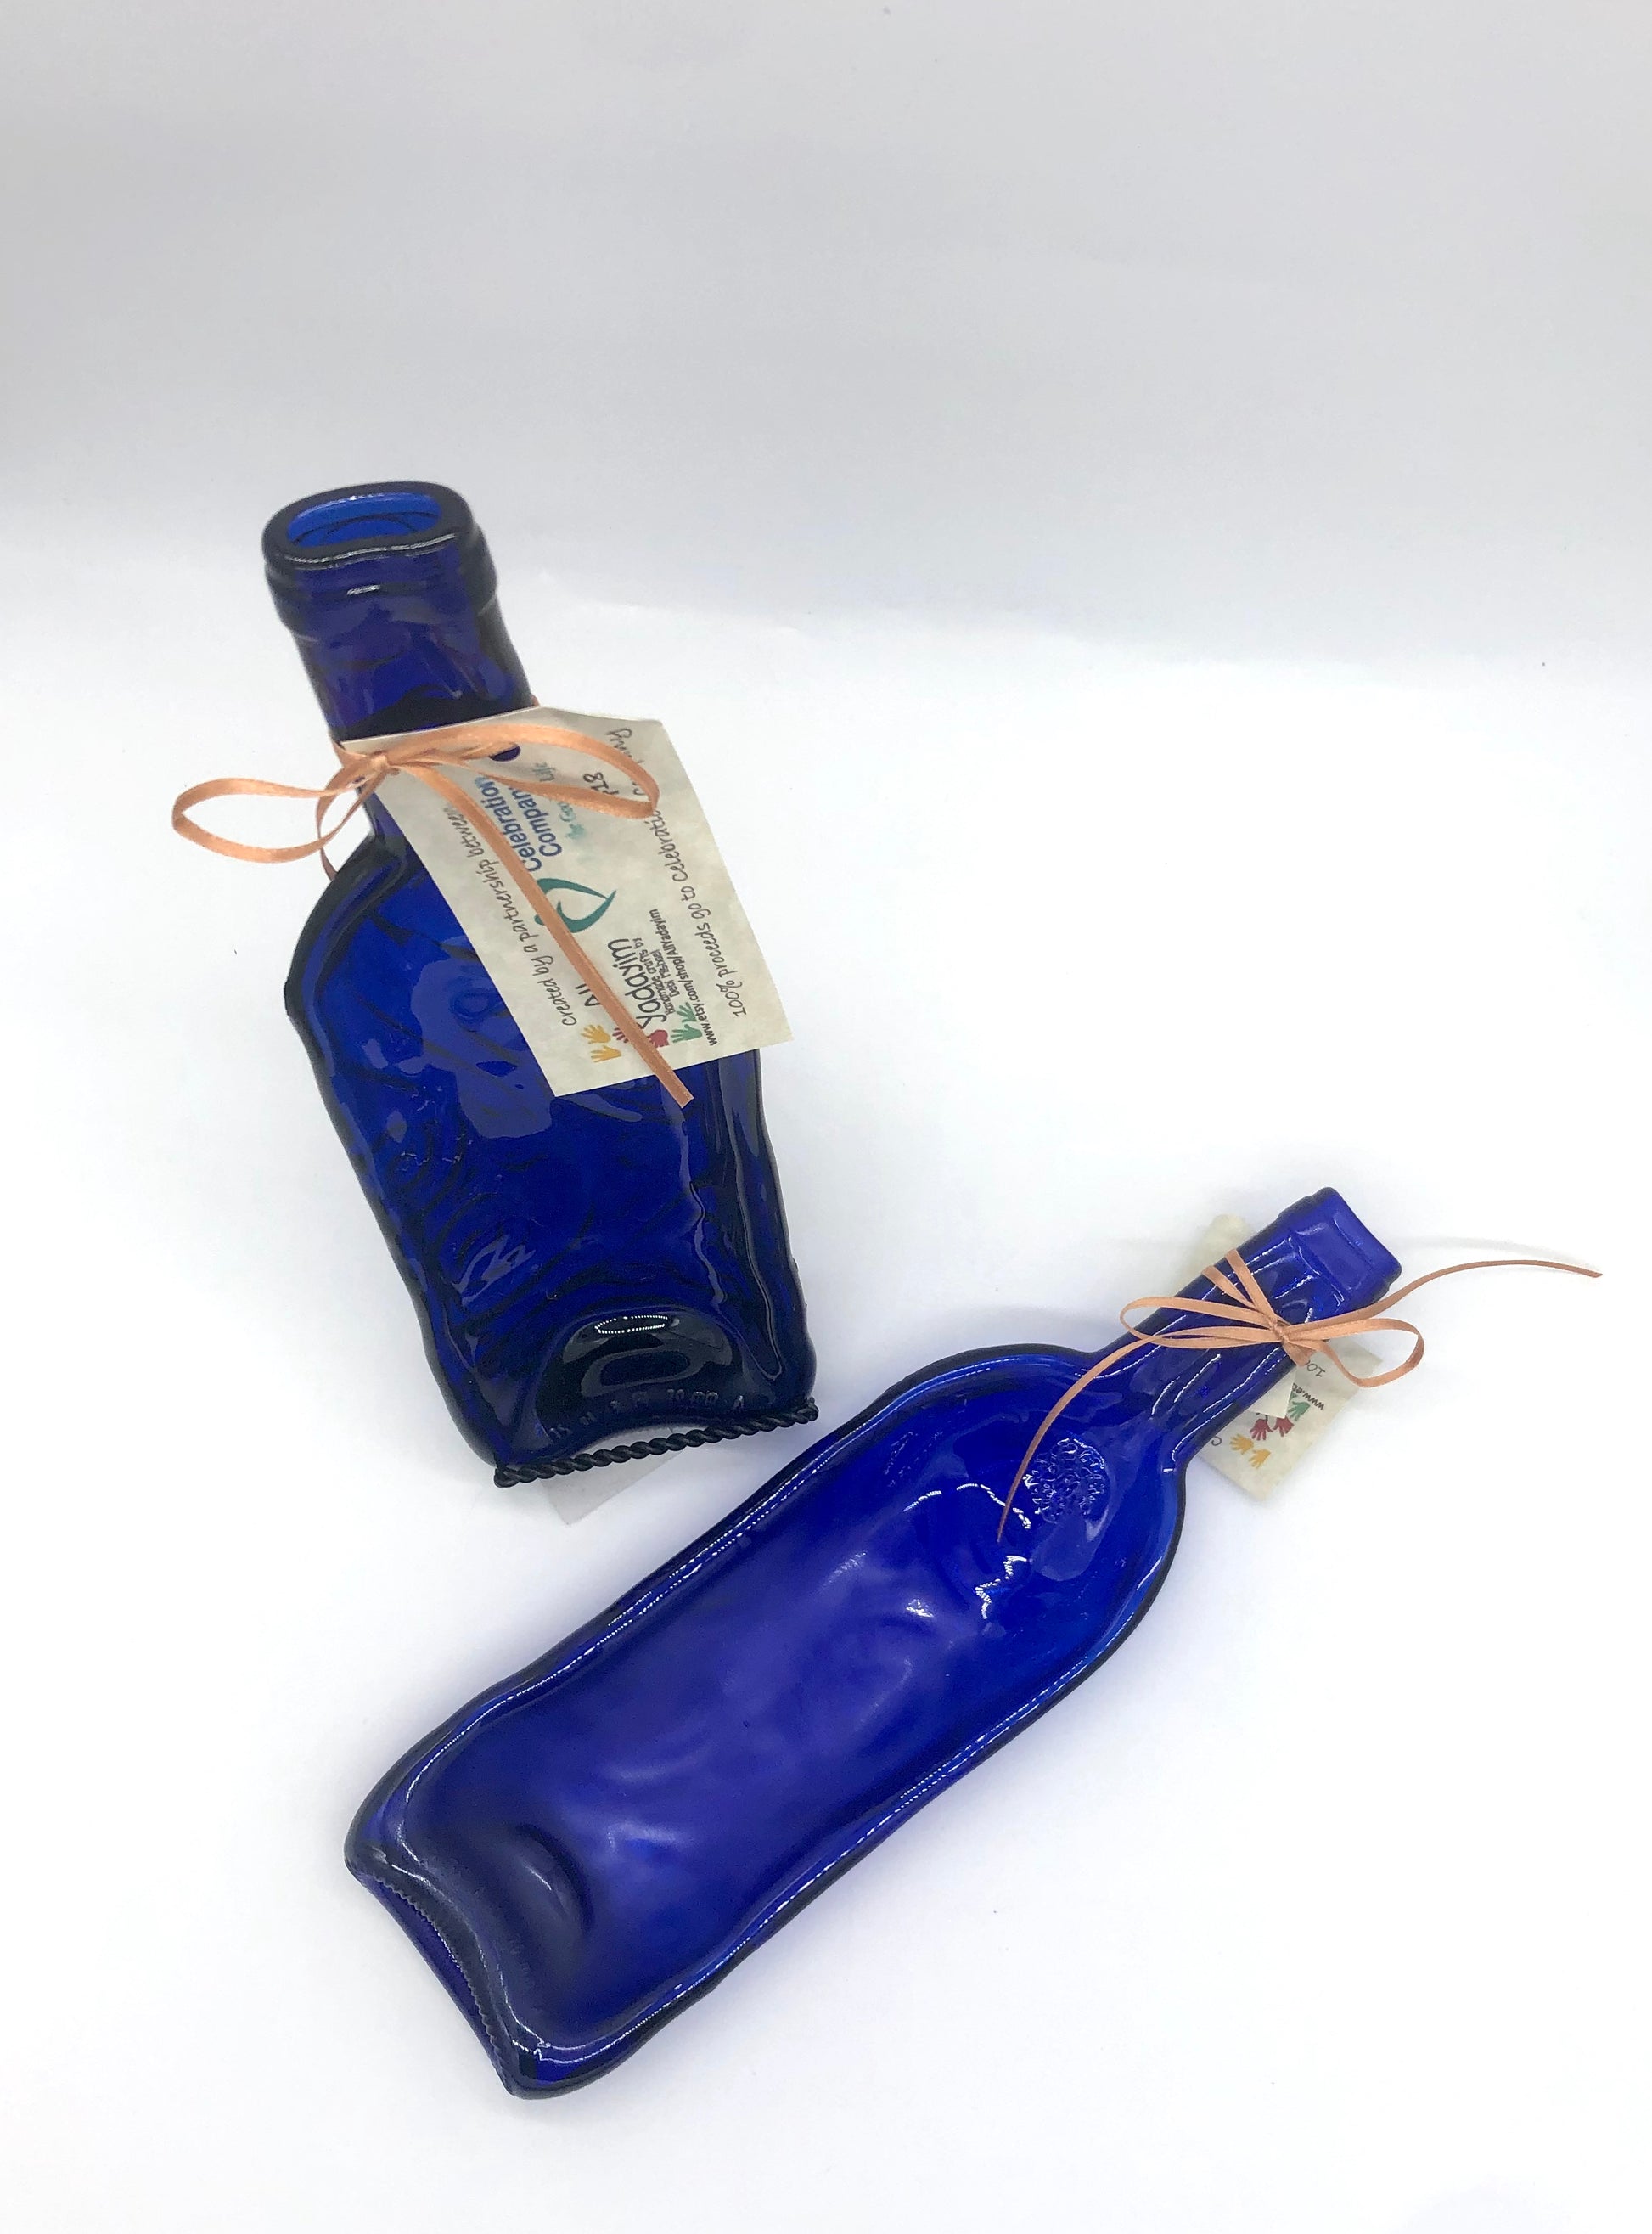 Two blue wine bottles that have been melted down and flattened